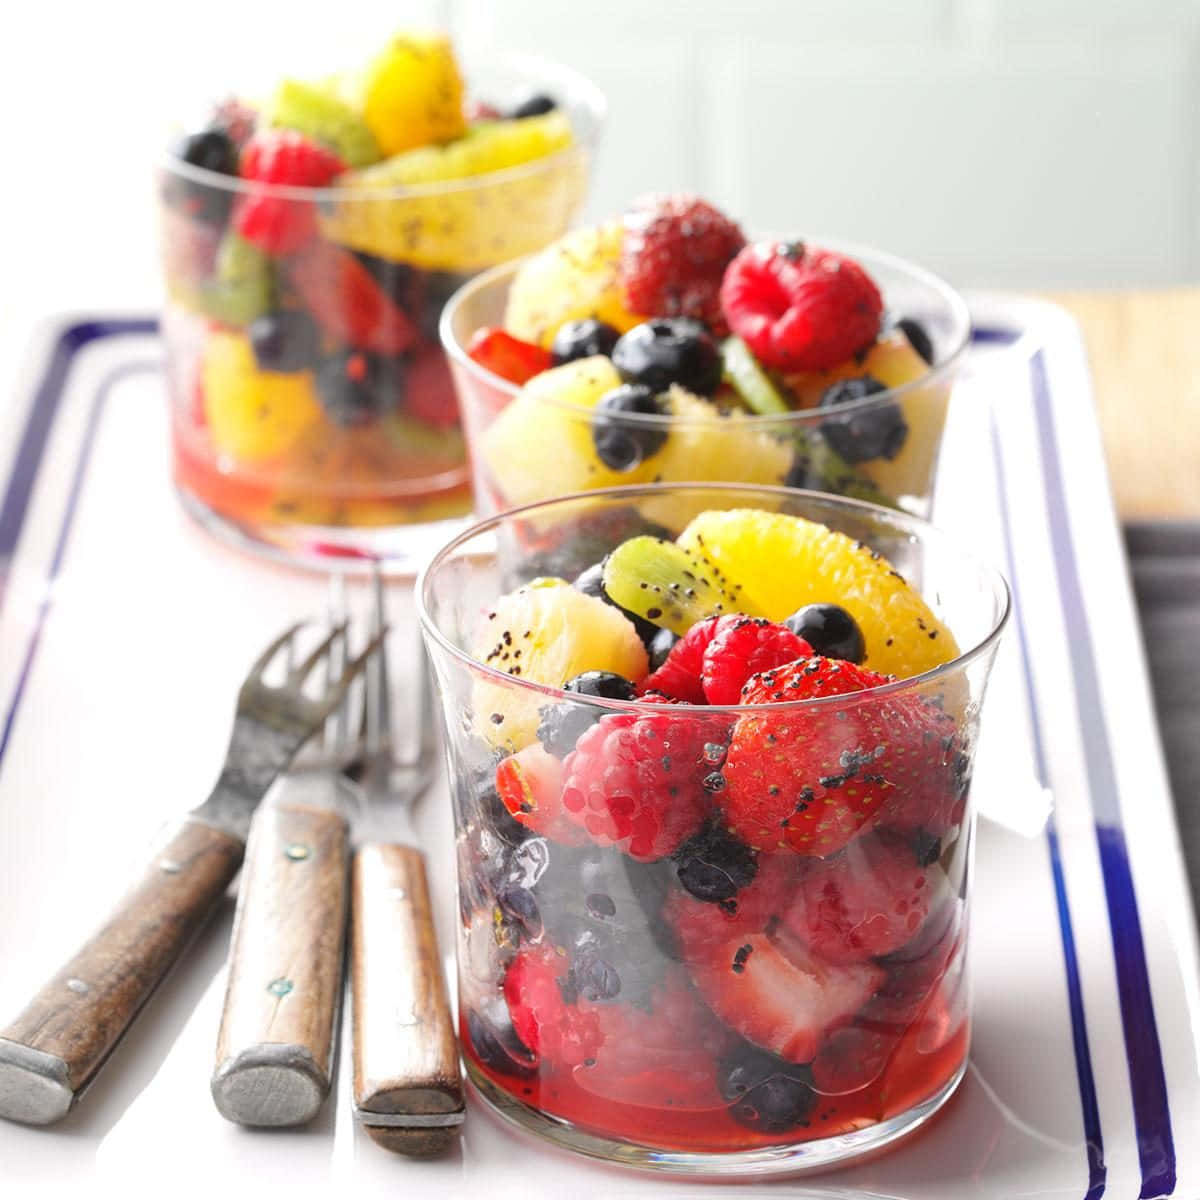 Enjoy the Freshness of a Variety of Juicy Fruits